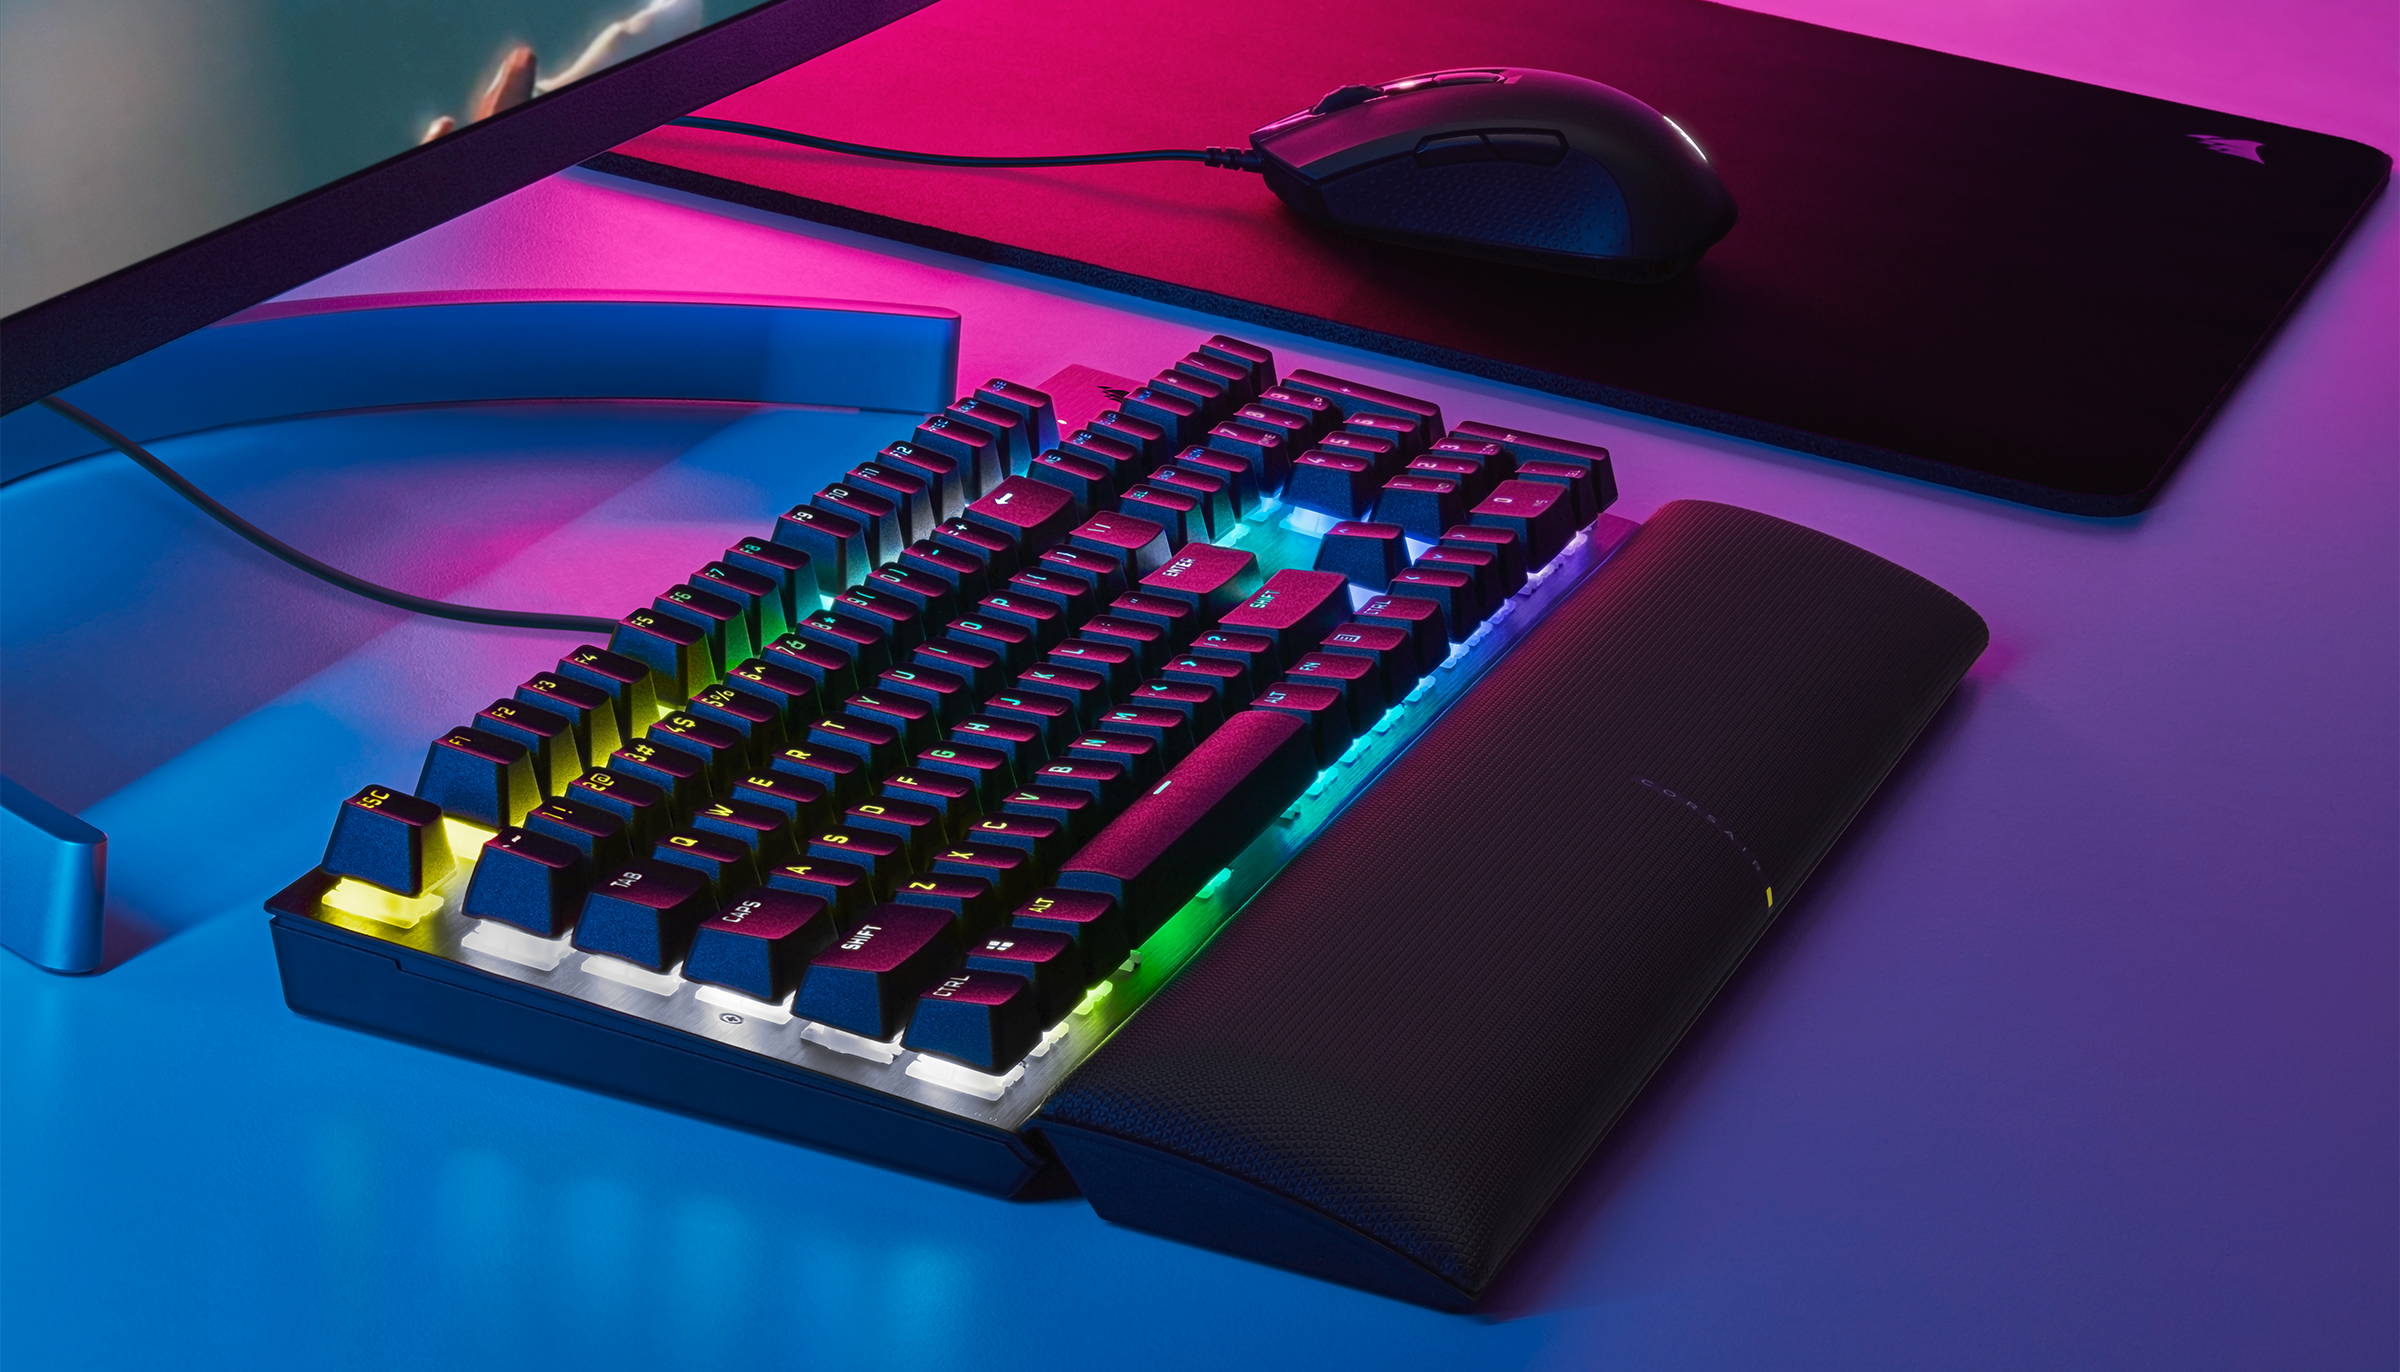 Sørge over Så mange kold CORSAIR on Twitter: "Our US Black Friday deals are live! Get the K60 RGB  PRO SE for only $69.99, and shop other deals while supplies last! ⌨️  https://t.co/cHbcZAn1l5 💸 https://t.co/shMBt8VvE0 https://t.co/qgdMkVD8Vp"  /